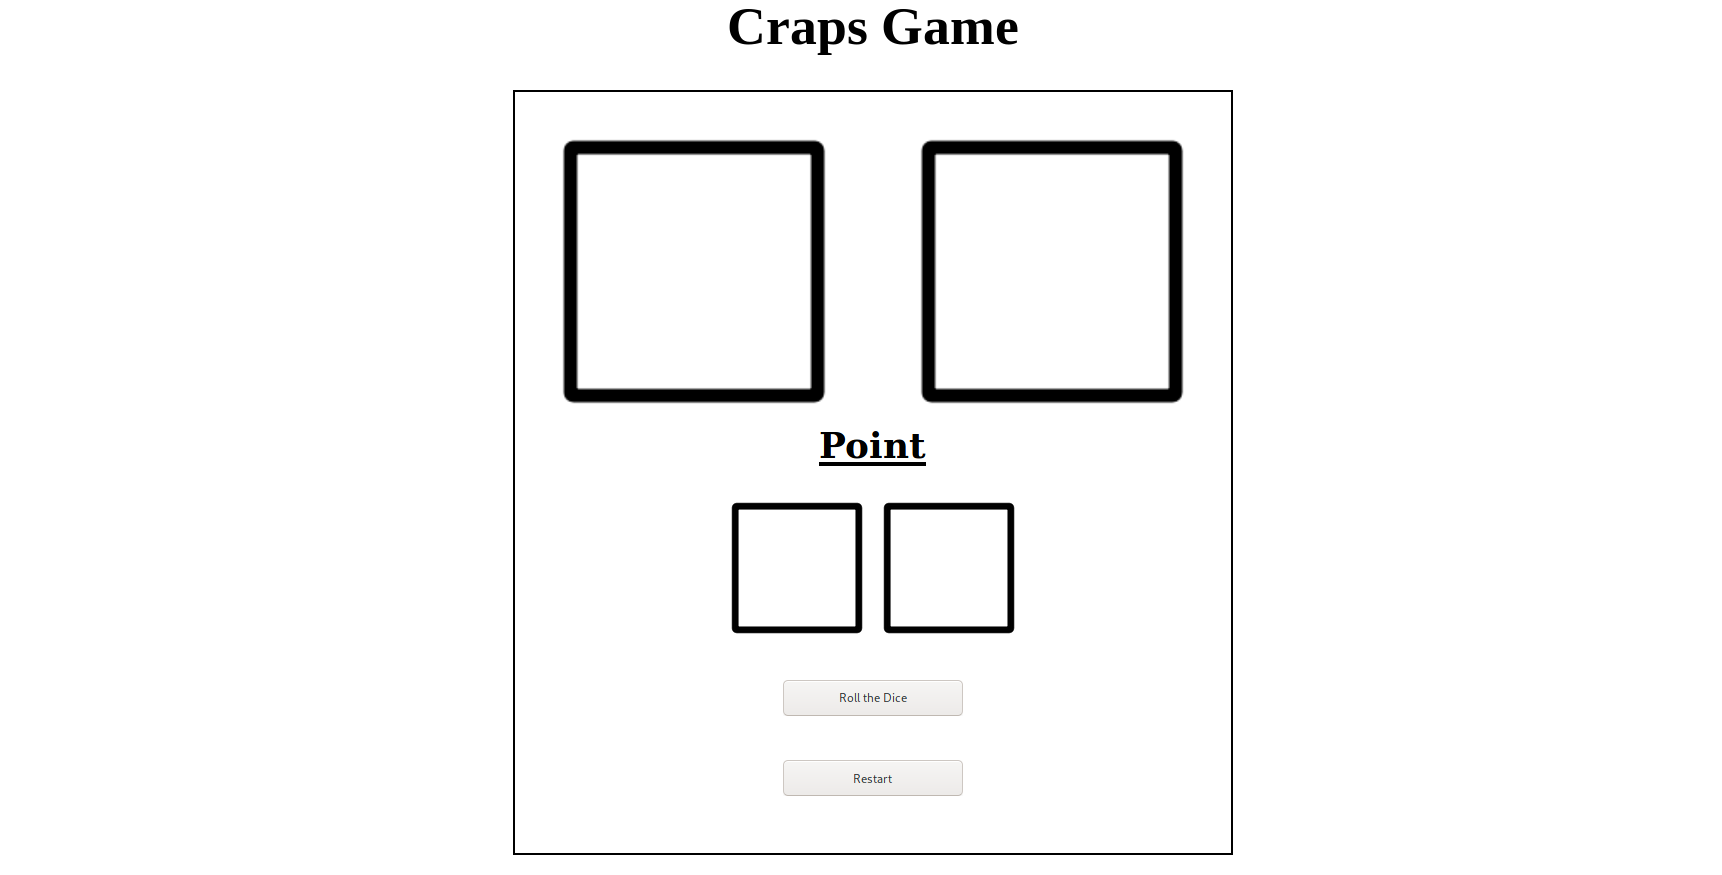 Craps image has not loaded